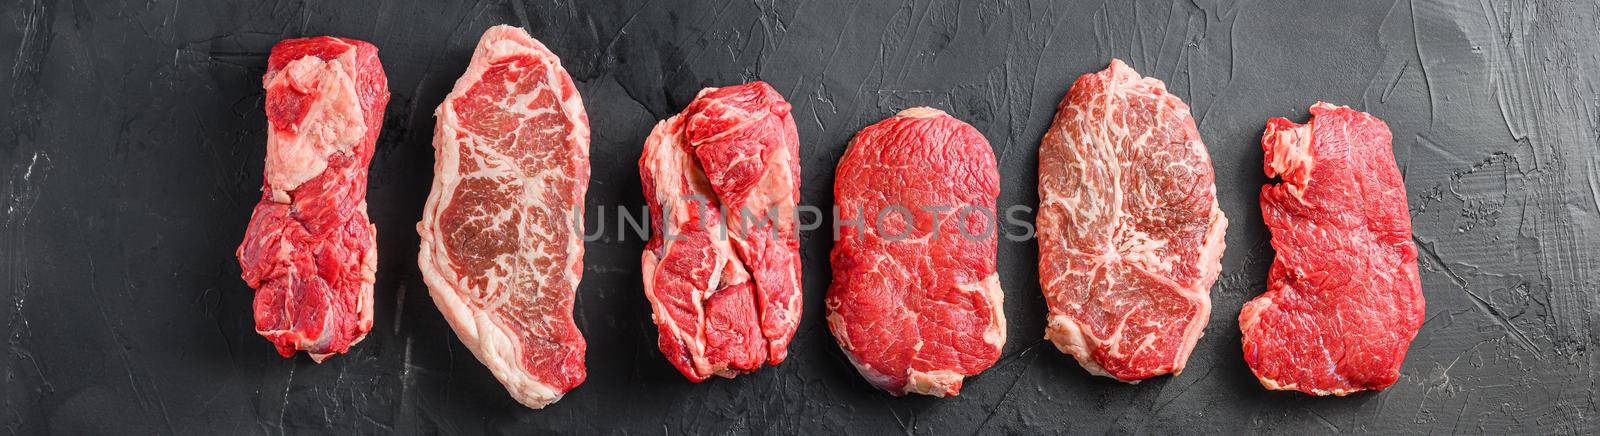 Variety of raw alternative steaks picanha, ramp and chuck eye roll and top blade over black background top view. Big size. Banner view. by Ilianesolenyi